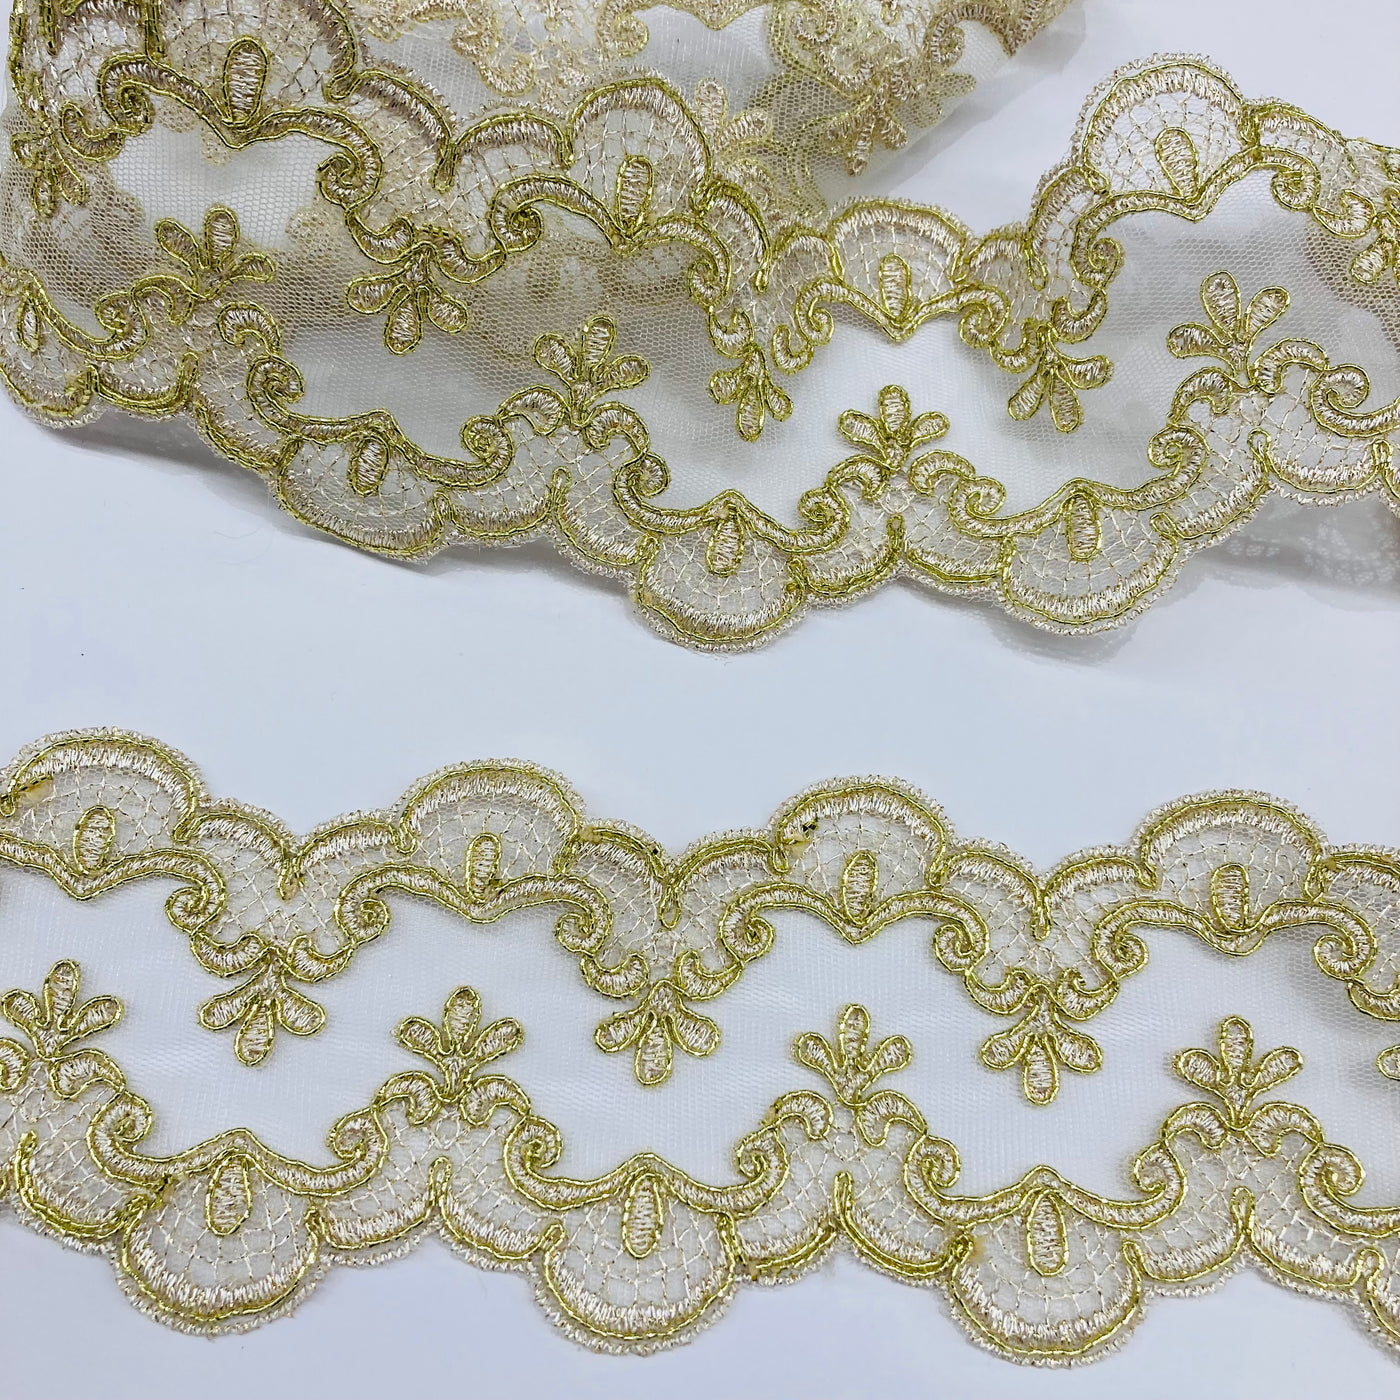 Corded & Embroidered Double Sided Gold Trimming on Mesh Net Lace. Lace USA